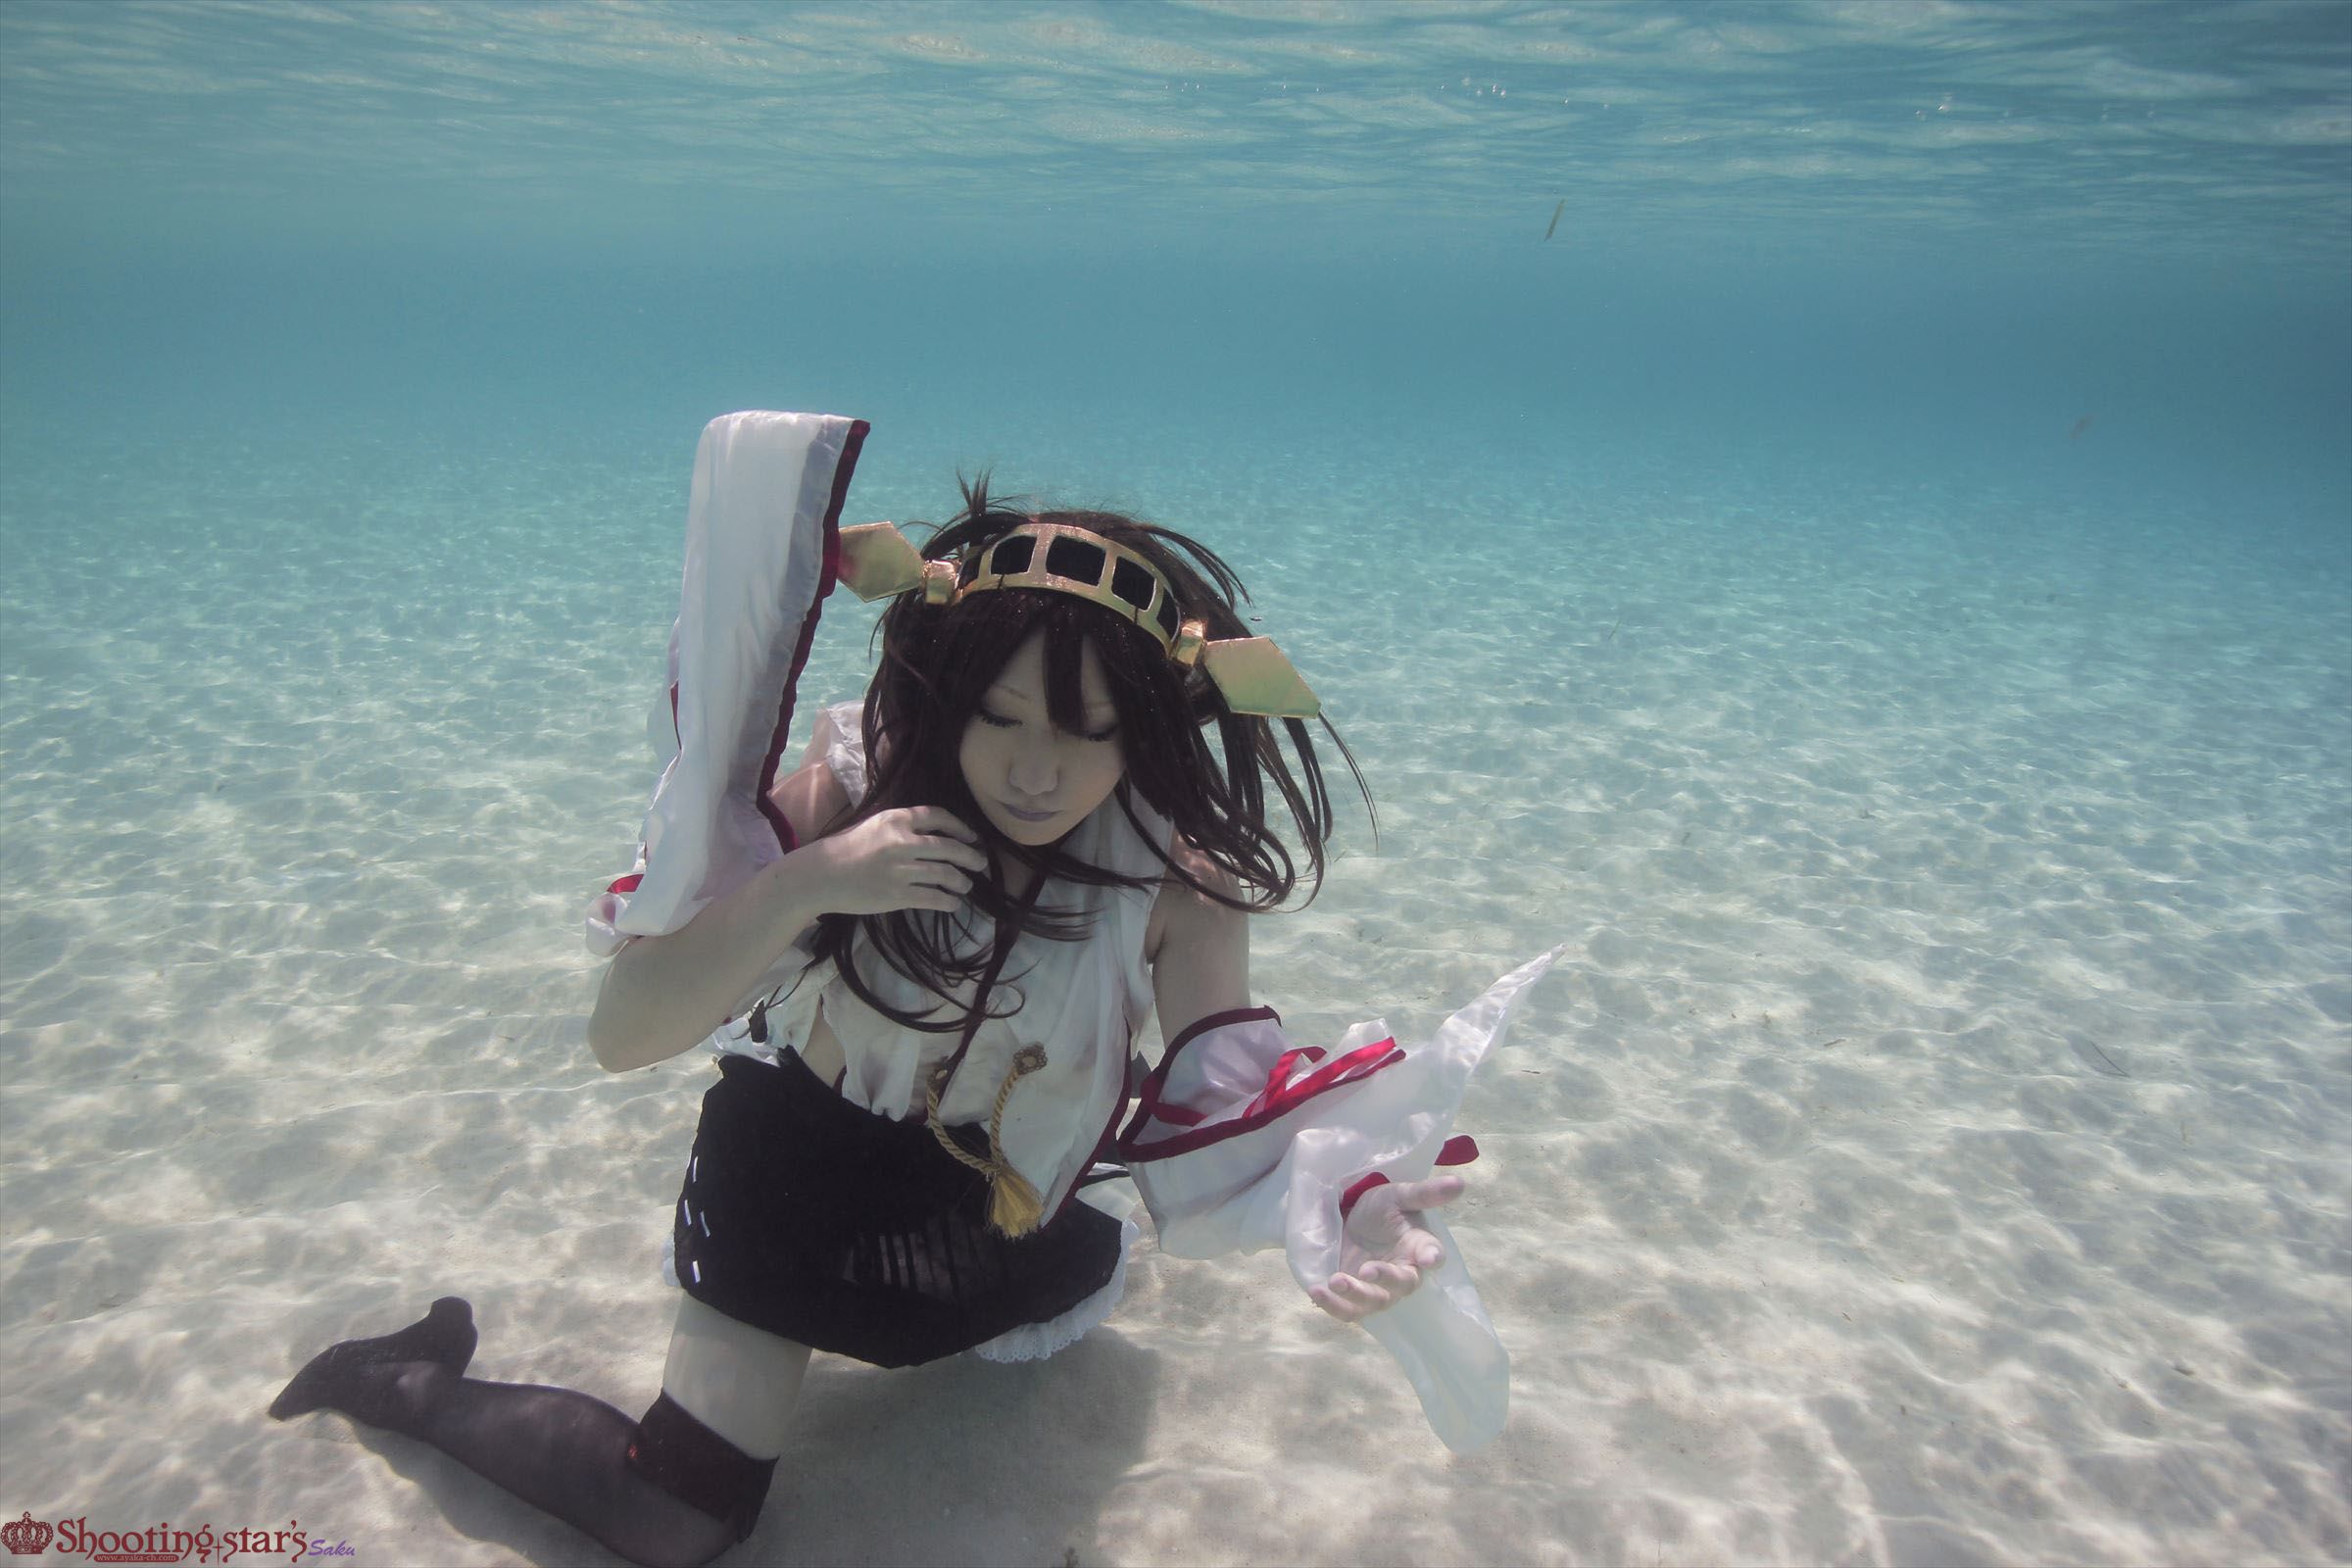 [Cospley] Sexy Kongou from Kantai Collection under the water 之水下系列[73P]